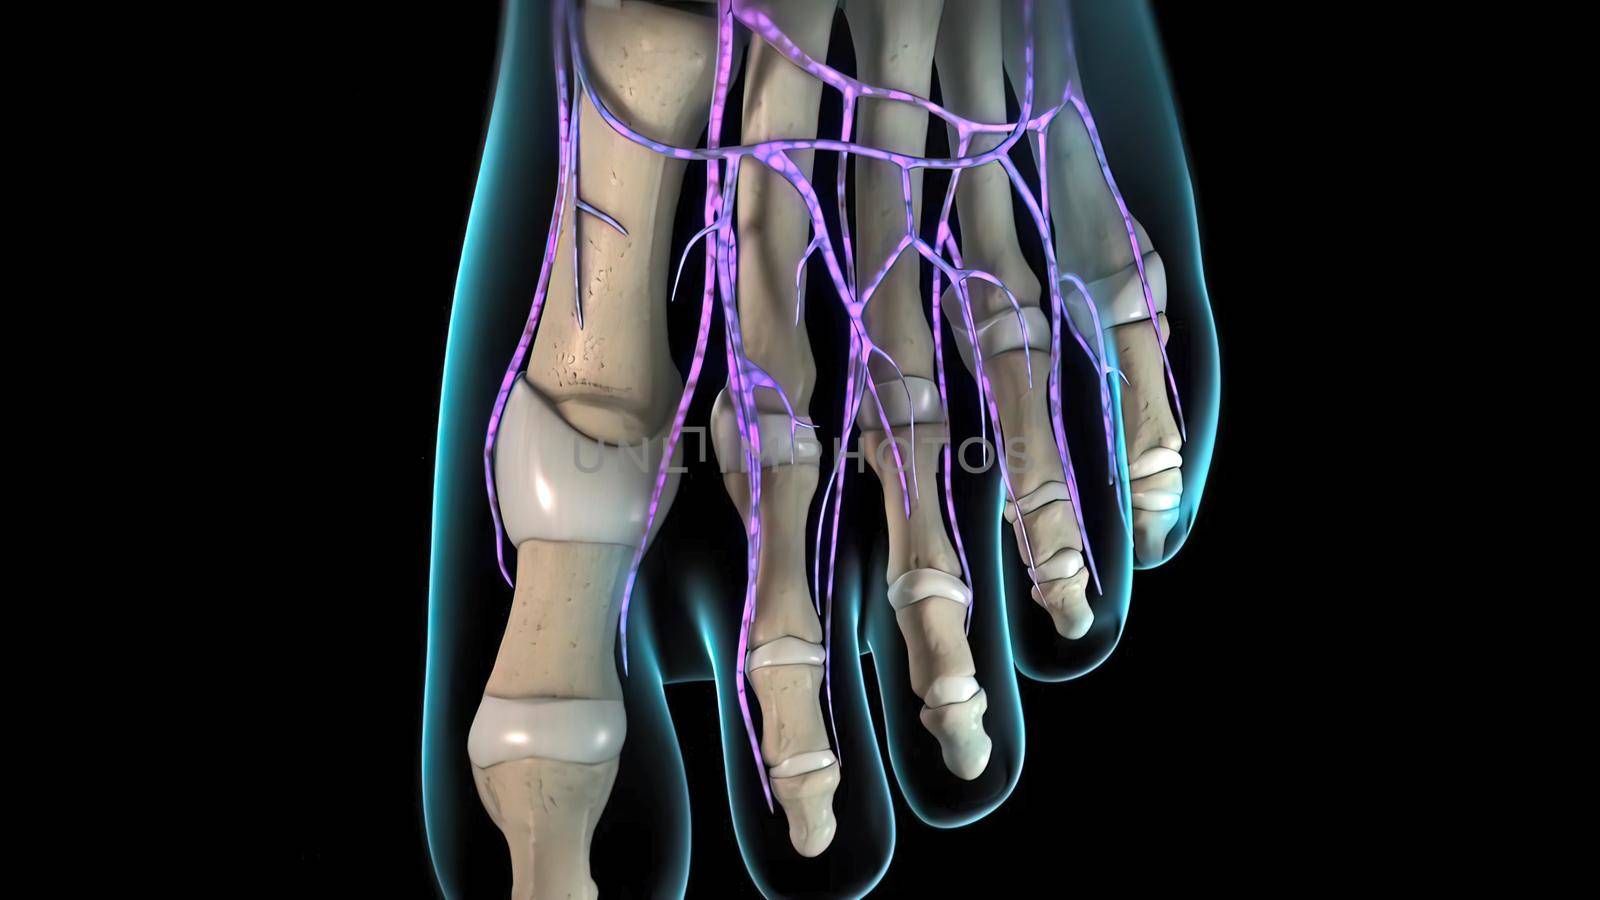 Nerve endings in the toes 3d illustration